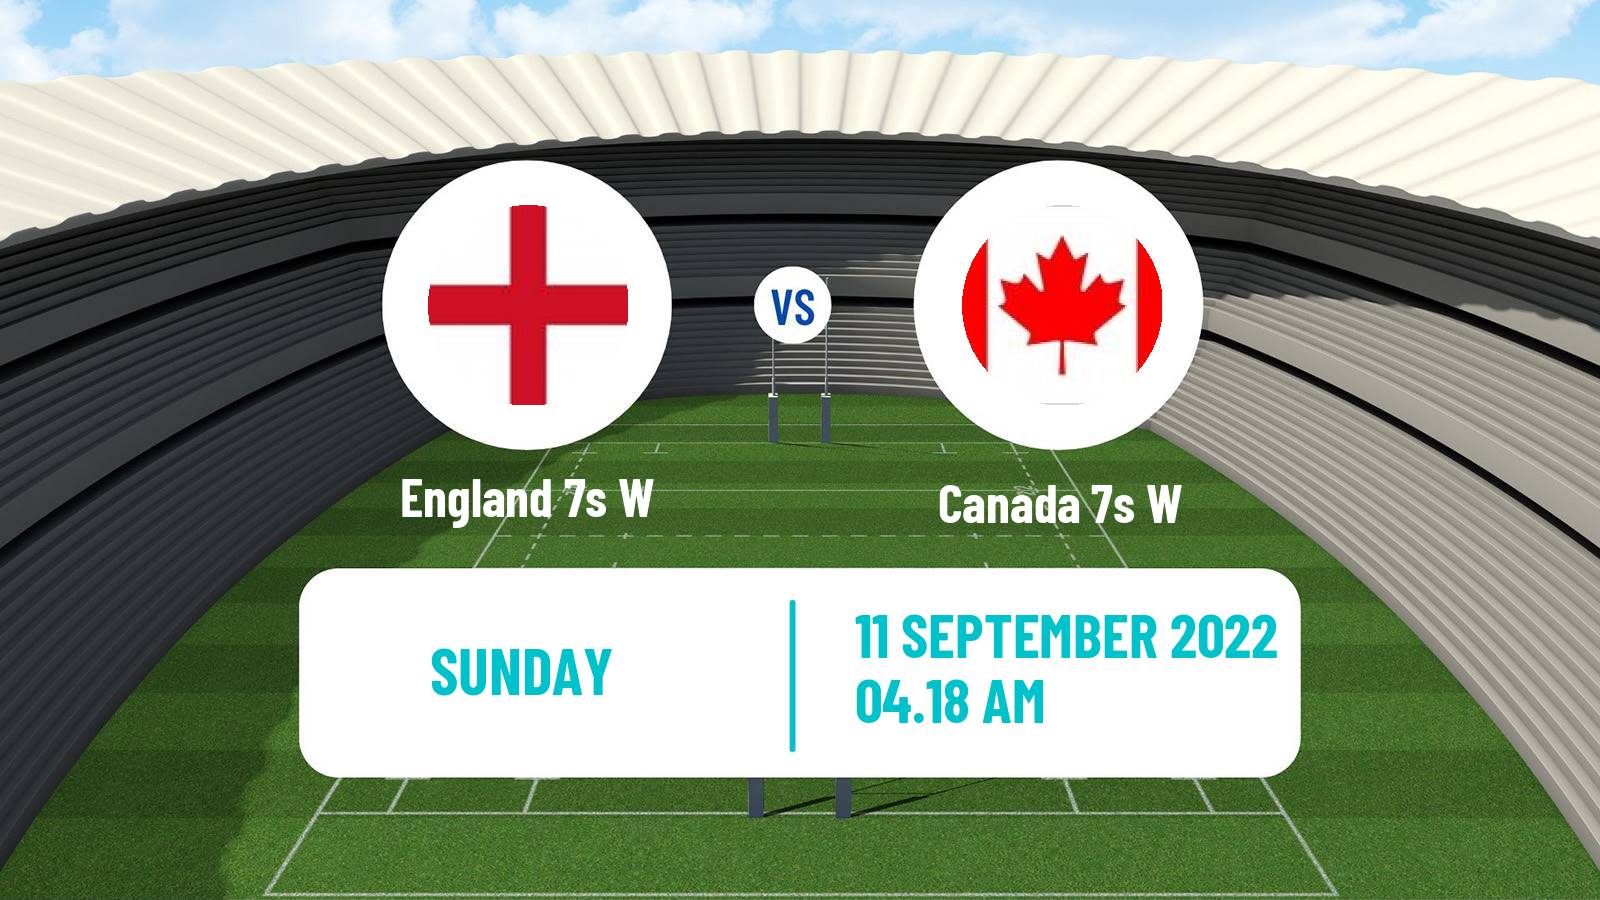 Rugby union Sevens World Cup Women England 7s W - Canada 7s W